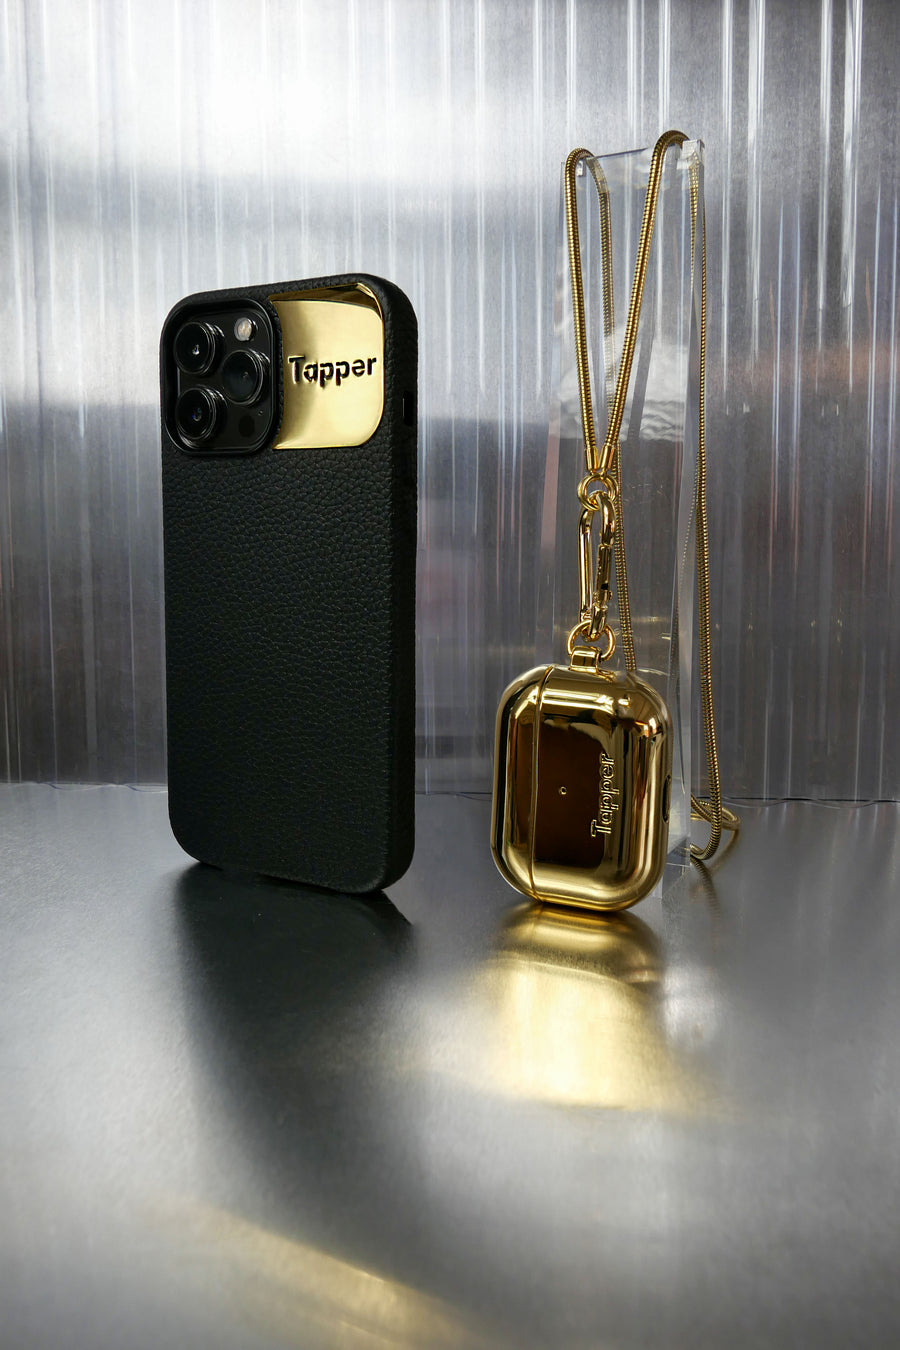 Tapper's luxurious black genuine lamb leather iPhone 13 Pro Max case with MagSafe and a metal logo plate in 18k gold plating that protects and elevates the look of your iPhone 13 Pro. The next must-have high end protective Apple iPhone accessory in real leather and precious metals. Designed in Sweden by Tapper. Free Express Shipping at gettapper.com